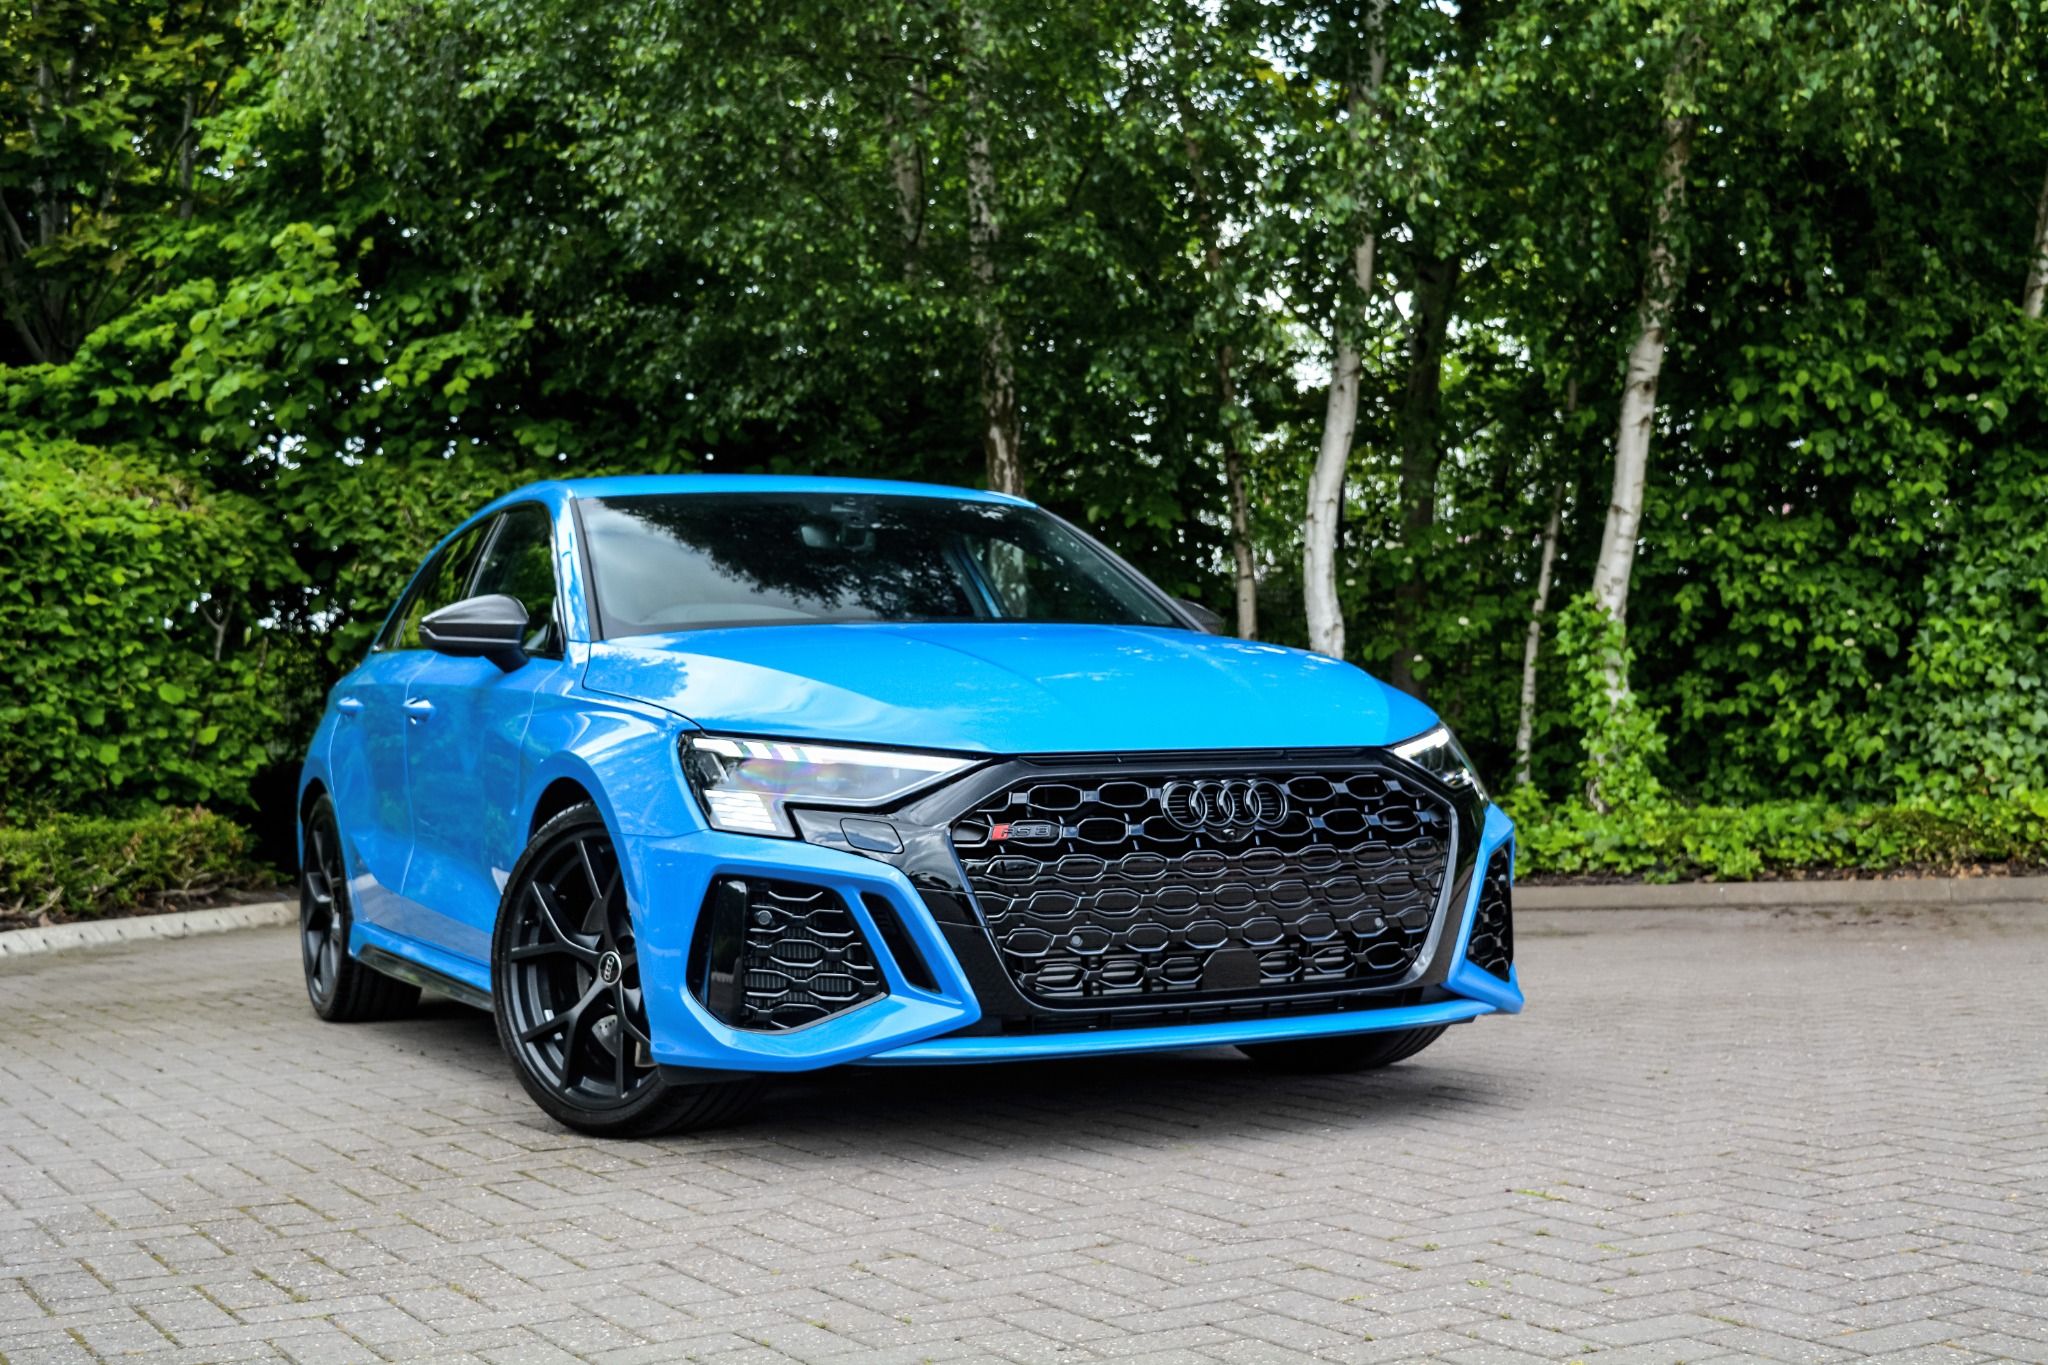 Front view of a Bright Blue Audi RS3 Sportback model